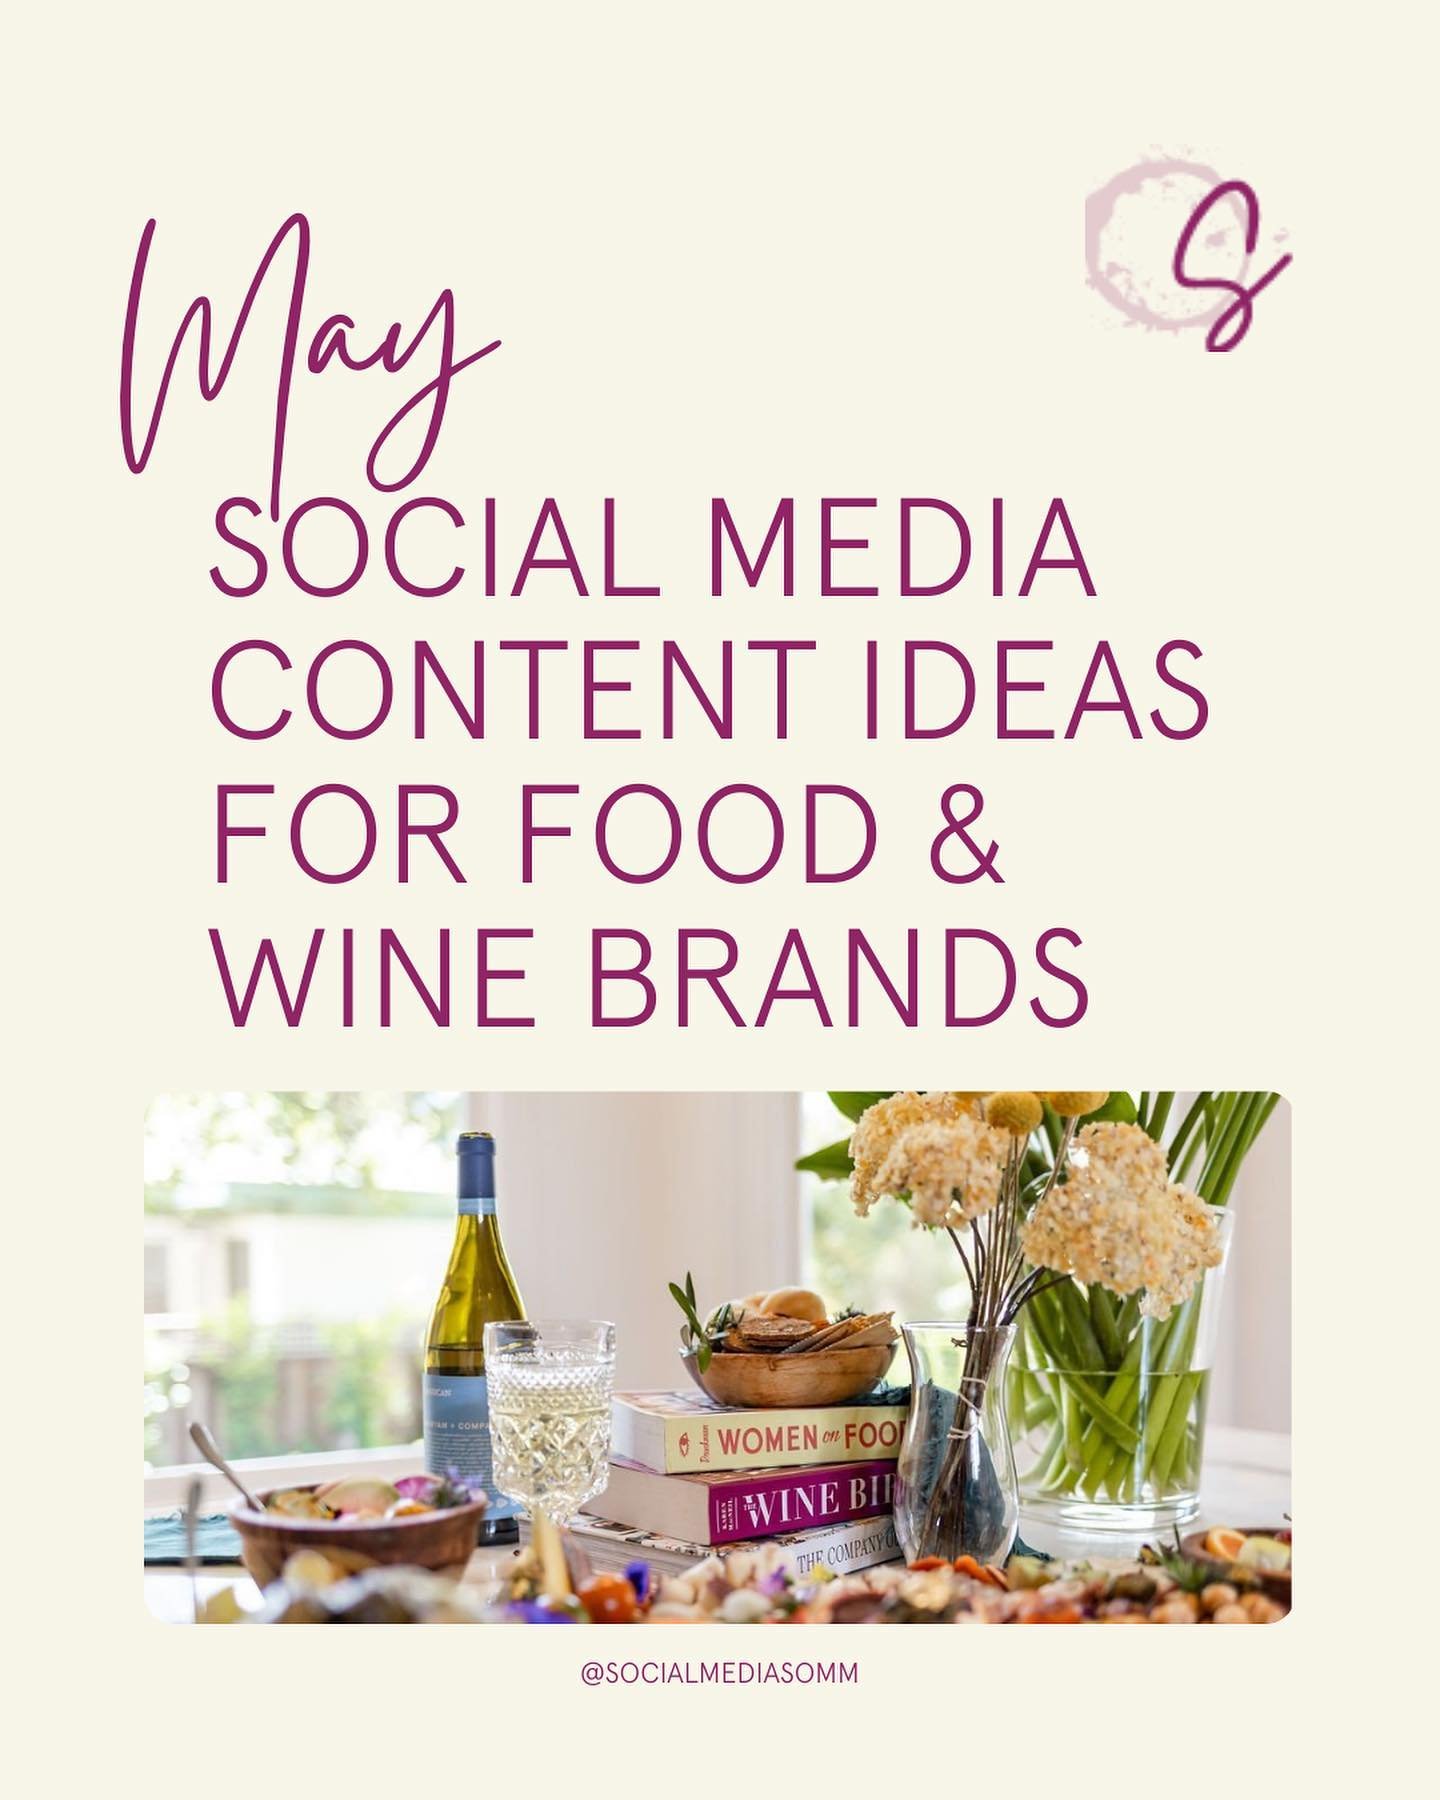 Struggling with post ideas? I gotchu. 😎

🥂 Swipe for content ideas to keep your marketing pouring all month long!

Don&rsquo;t forget to 🔖SAVE this post to come back to when you&rsquo;re planning your content. 
.
.
.
#wineandfood #foodandwine #win